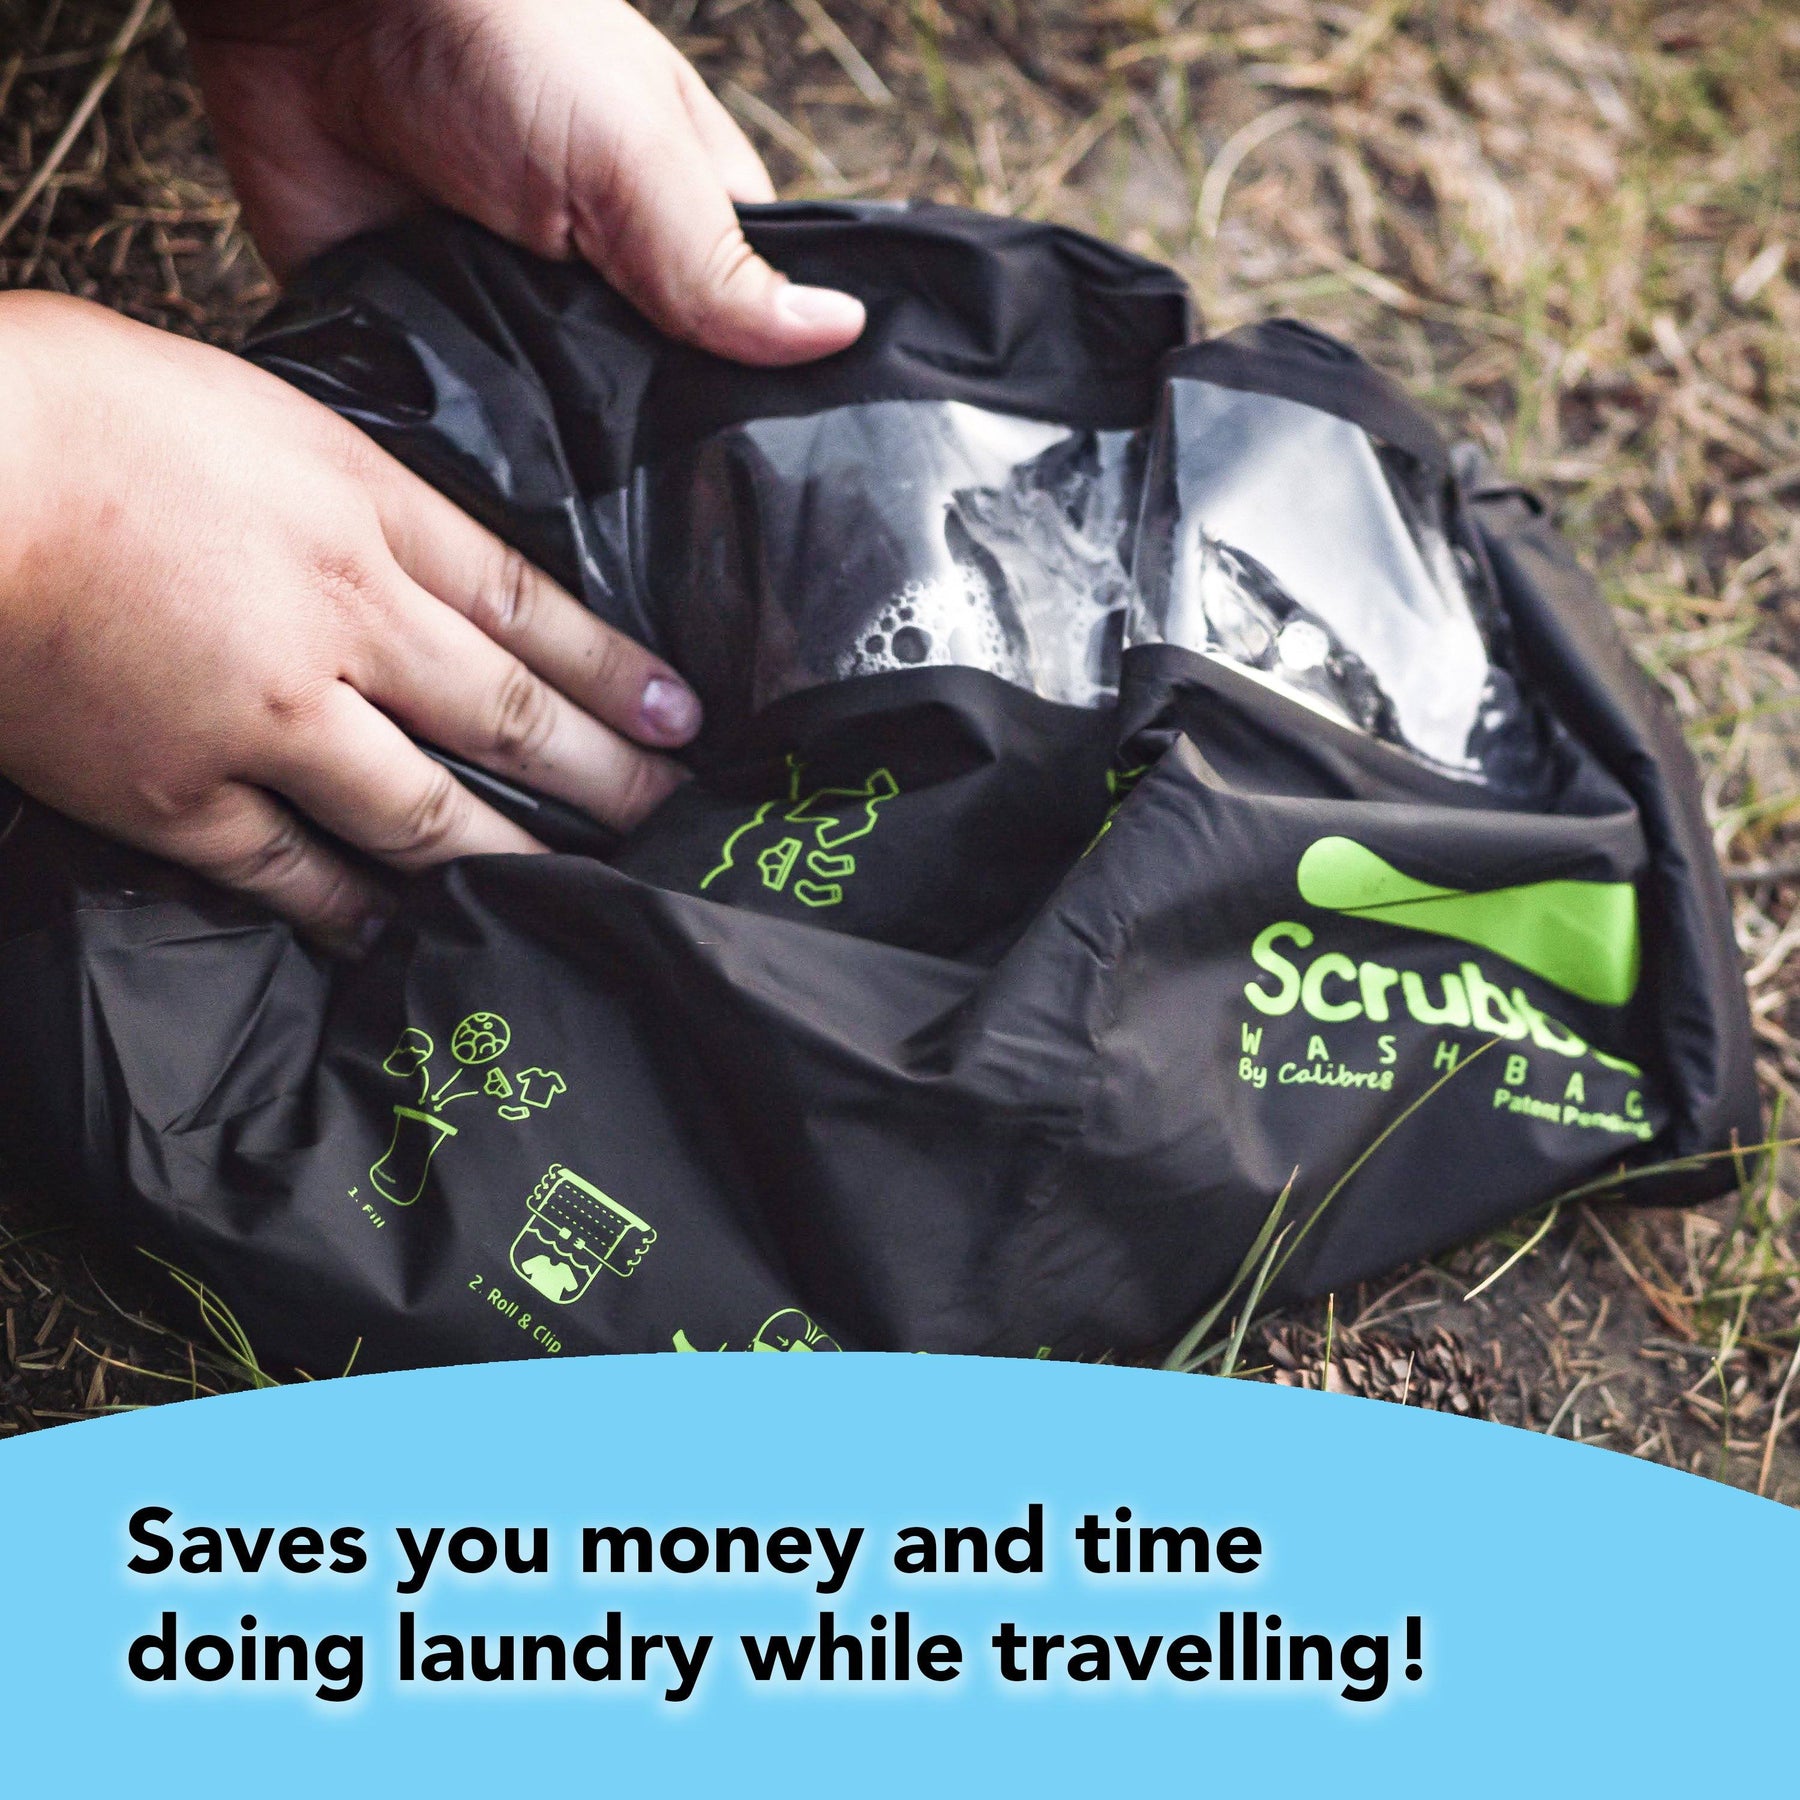 Scrubba Portable Wash Bag - Hand Washing Machine for Hotel and Travel - Light and Small Eco-Friendly Camping Laundry Bag for Washing Clothes Anywhere